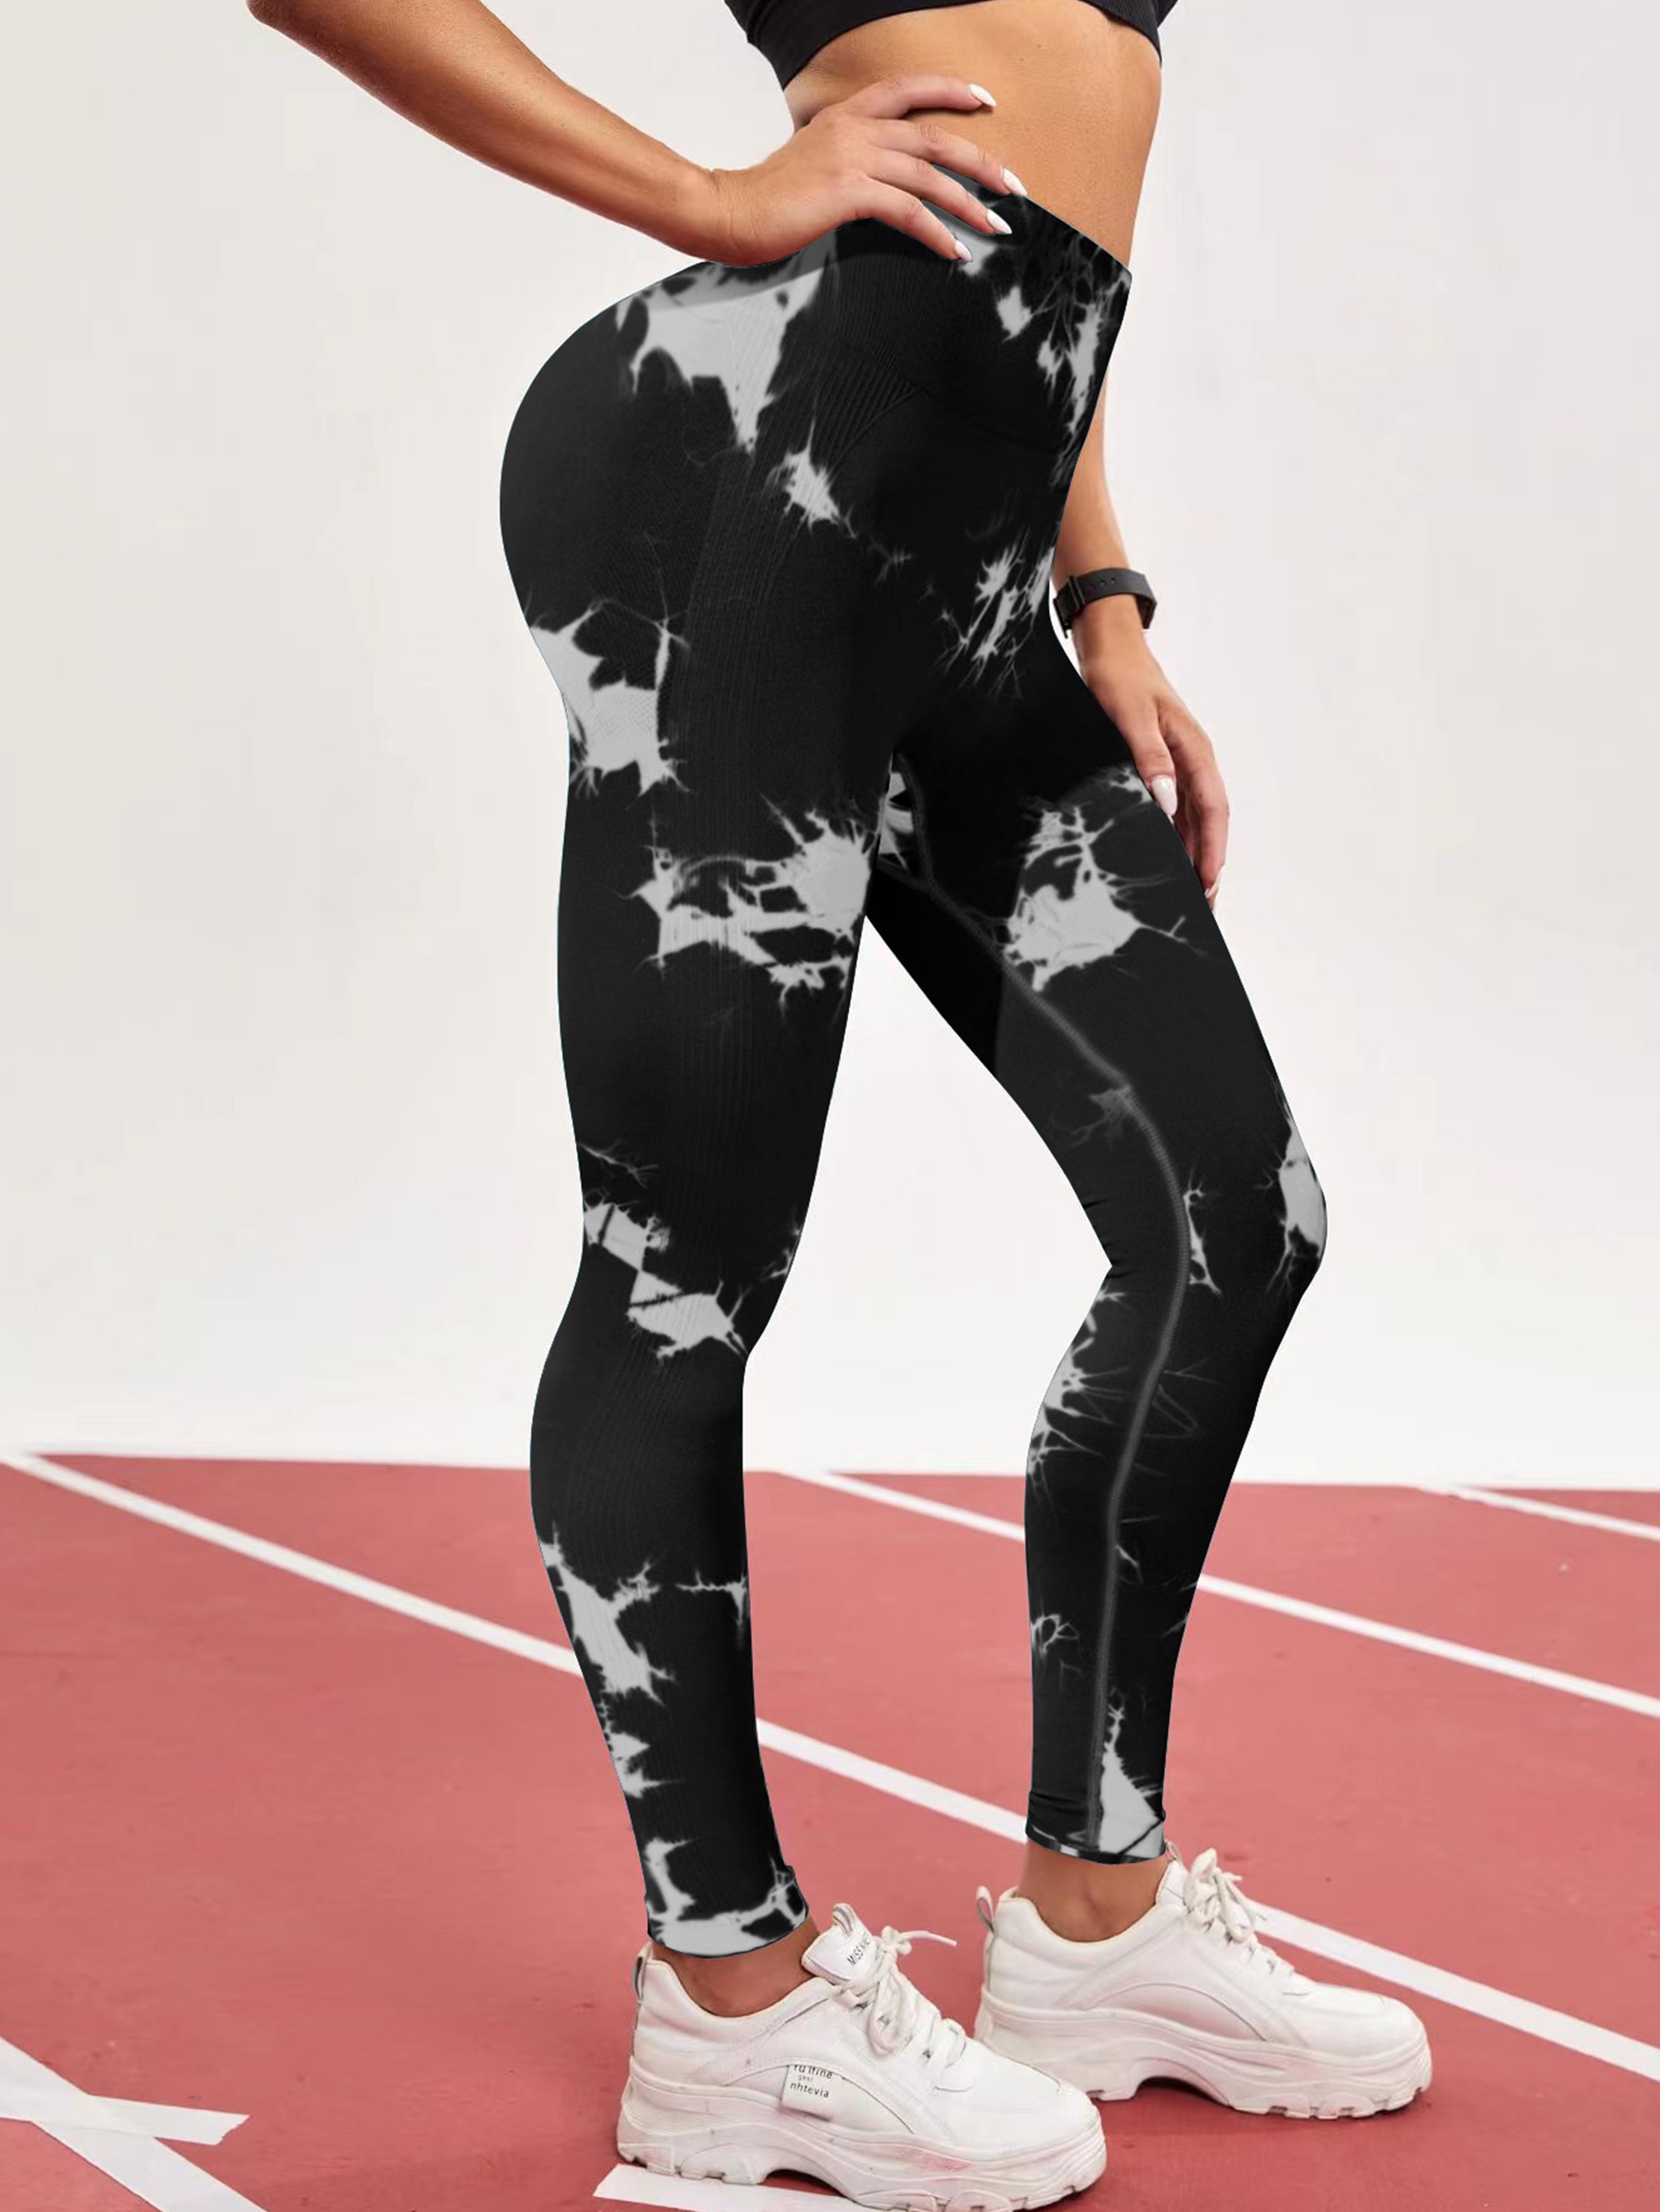 Womens Sport Skimpy Tie Dye Ripped Seamless Sporty Cutout High Waist Dressy  Leggings for Women Cute Tights Yoga Pants Black at  Women's Clothing  store